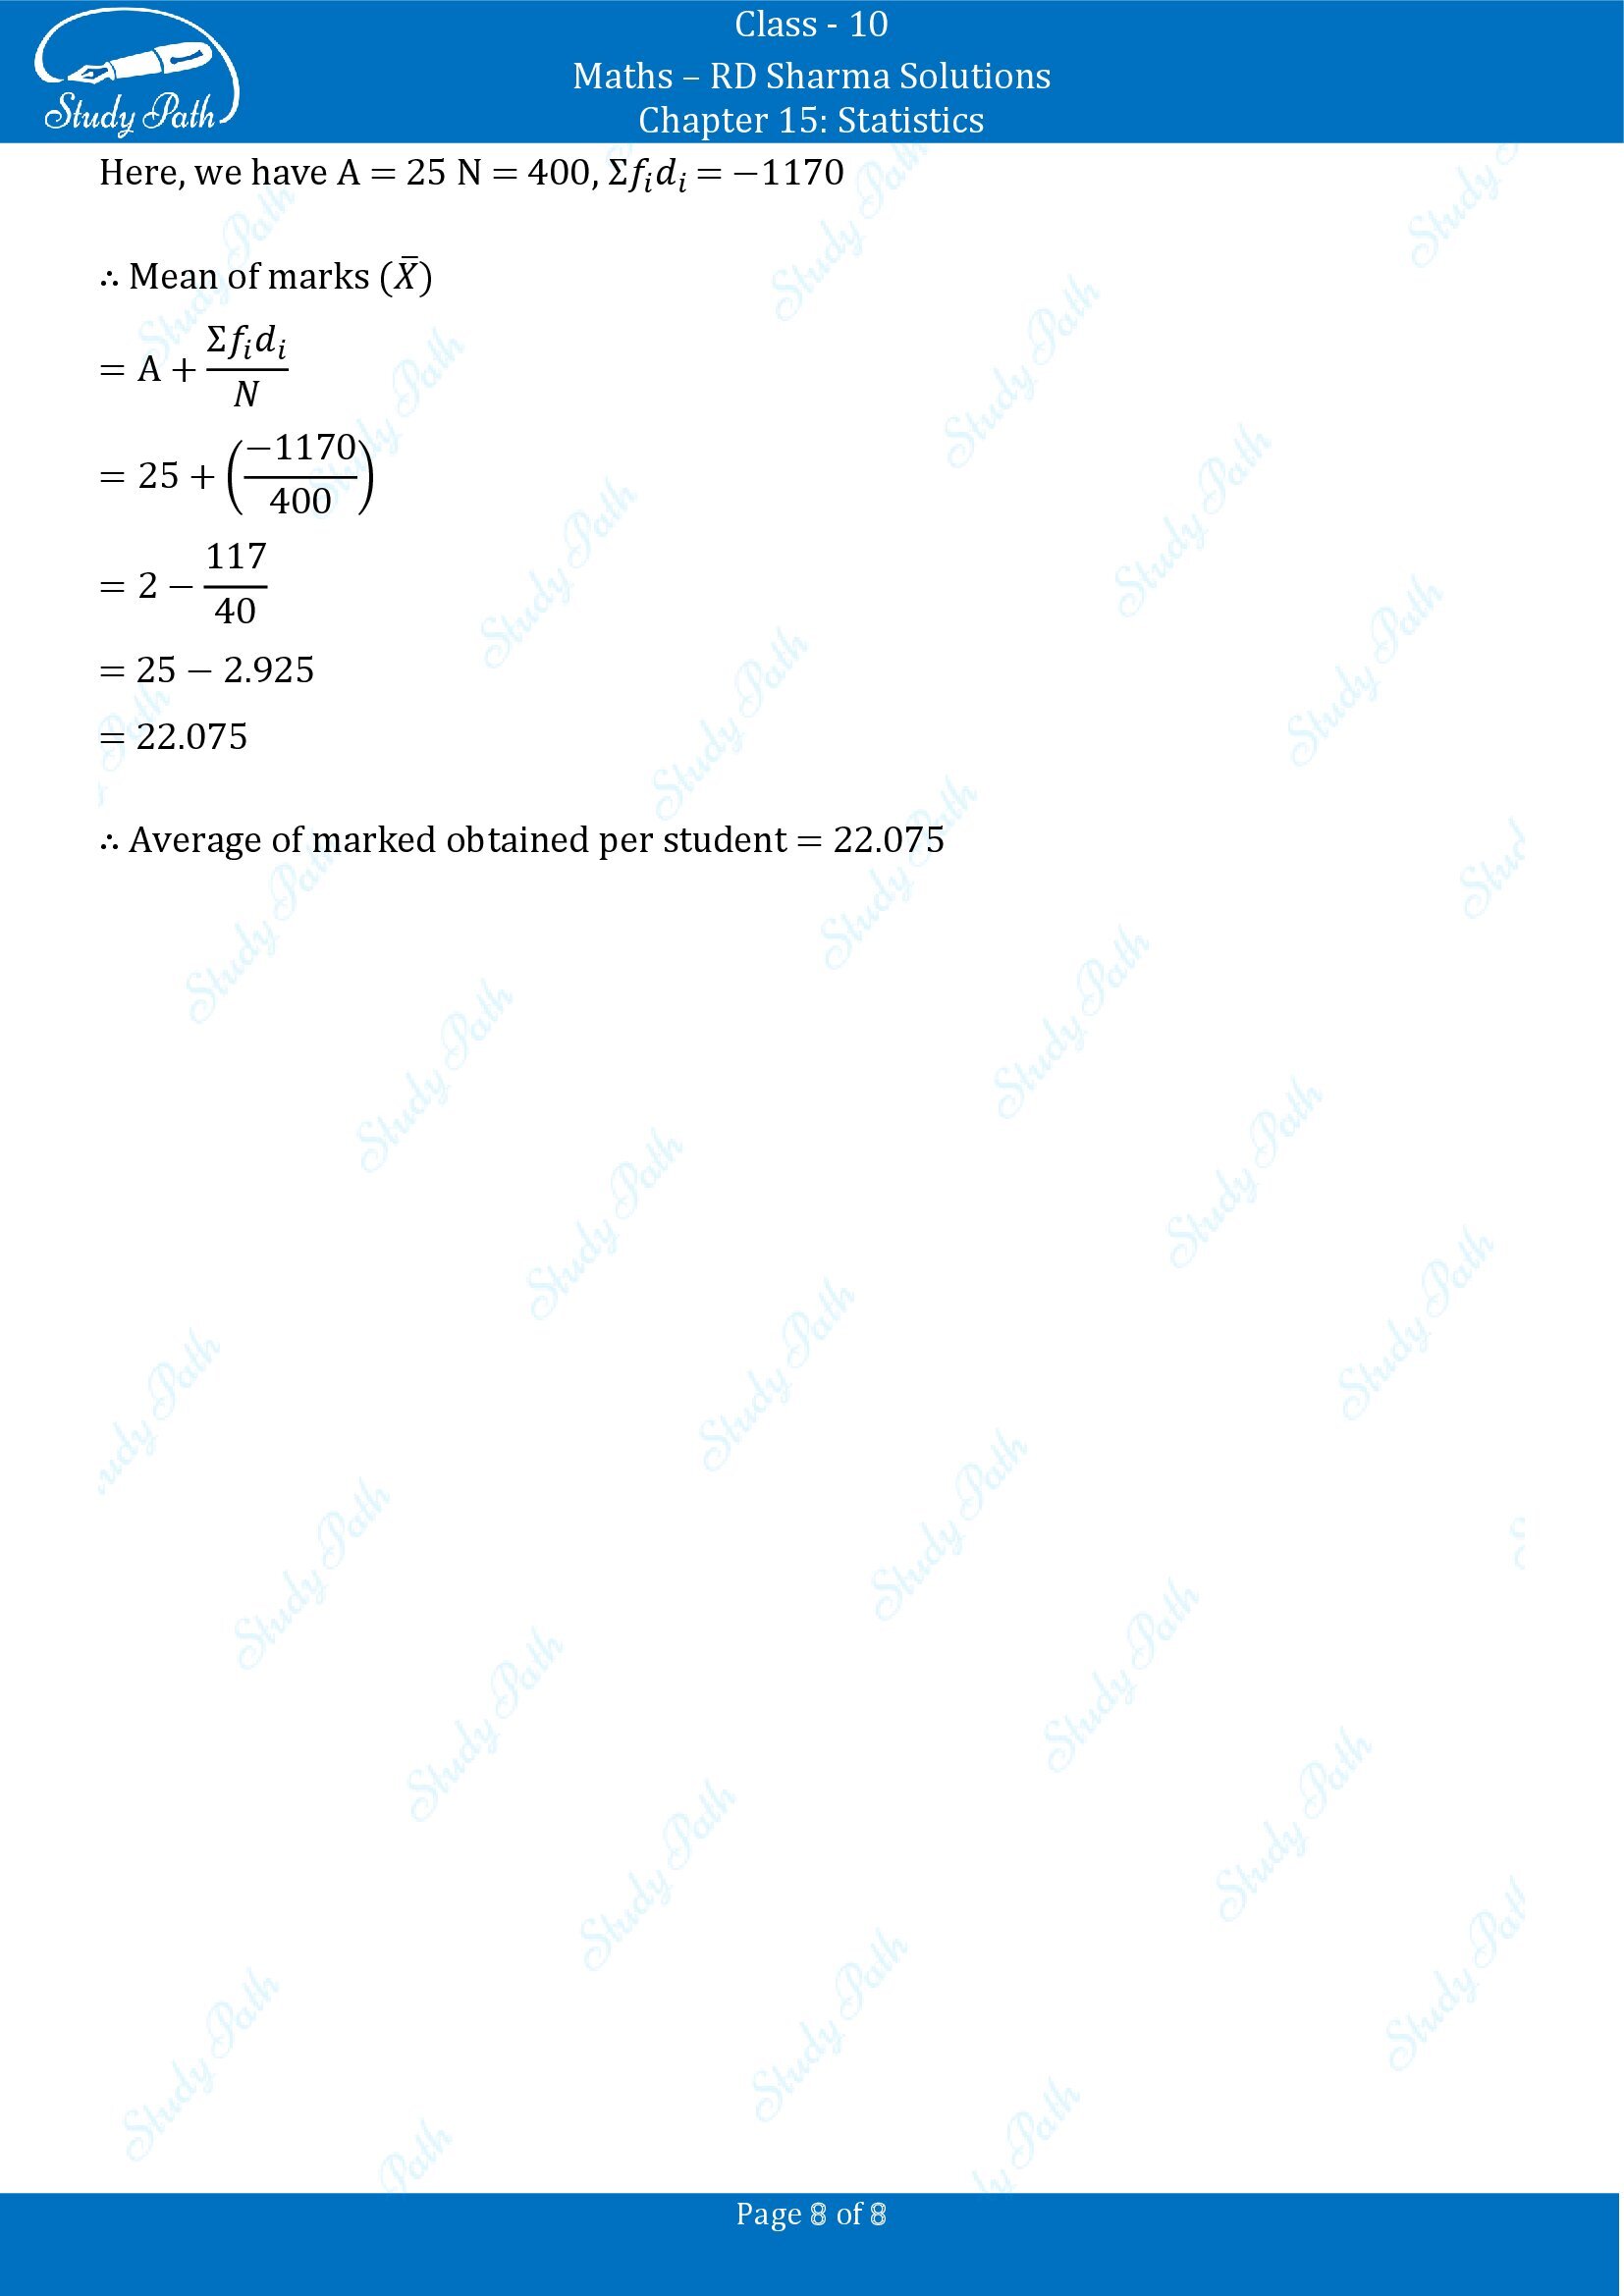 RD Sharma Solutions Class 10 Chapter 15 Statistics Exercise 15.2 00008